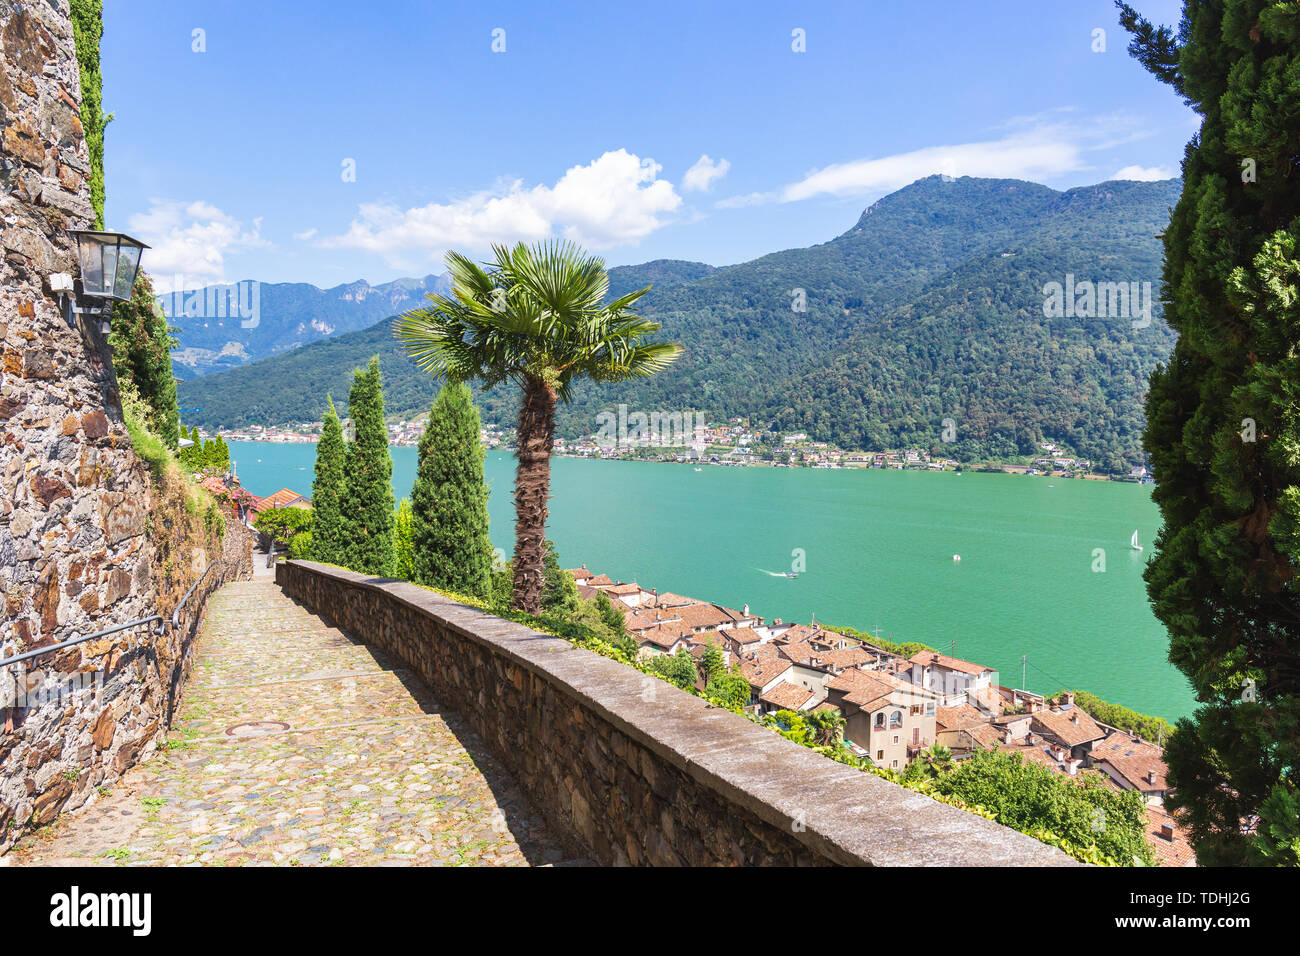 Balcony on the rooftops of Morcote and Lake Ceresio, Morcote, Canton Ticino, Switzerland Stock Photo